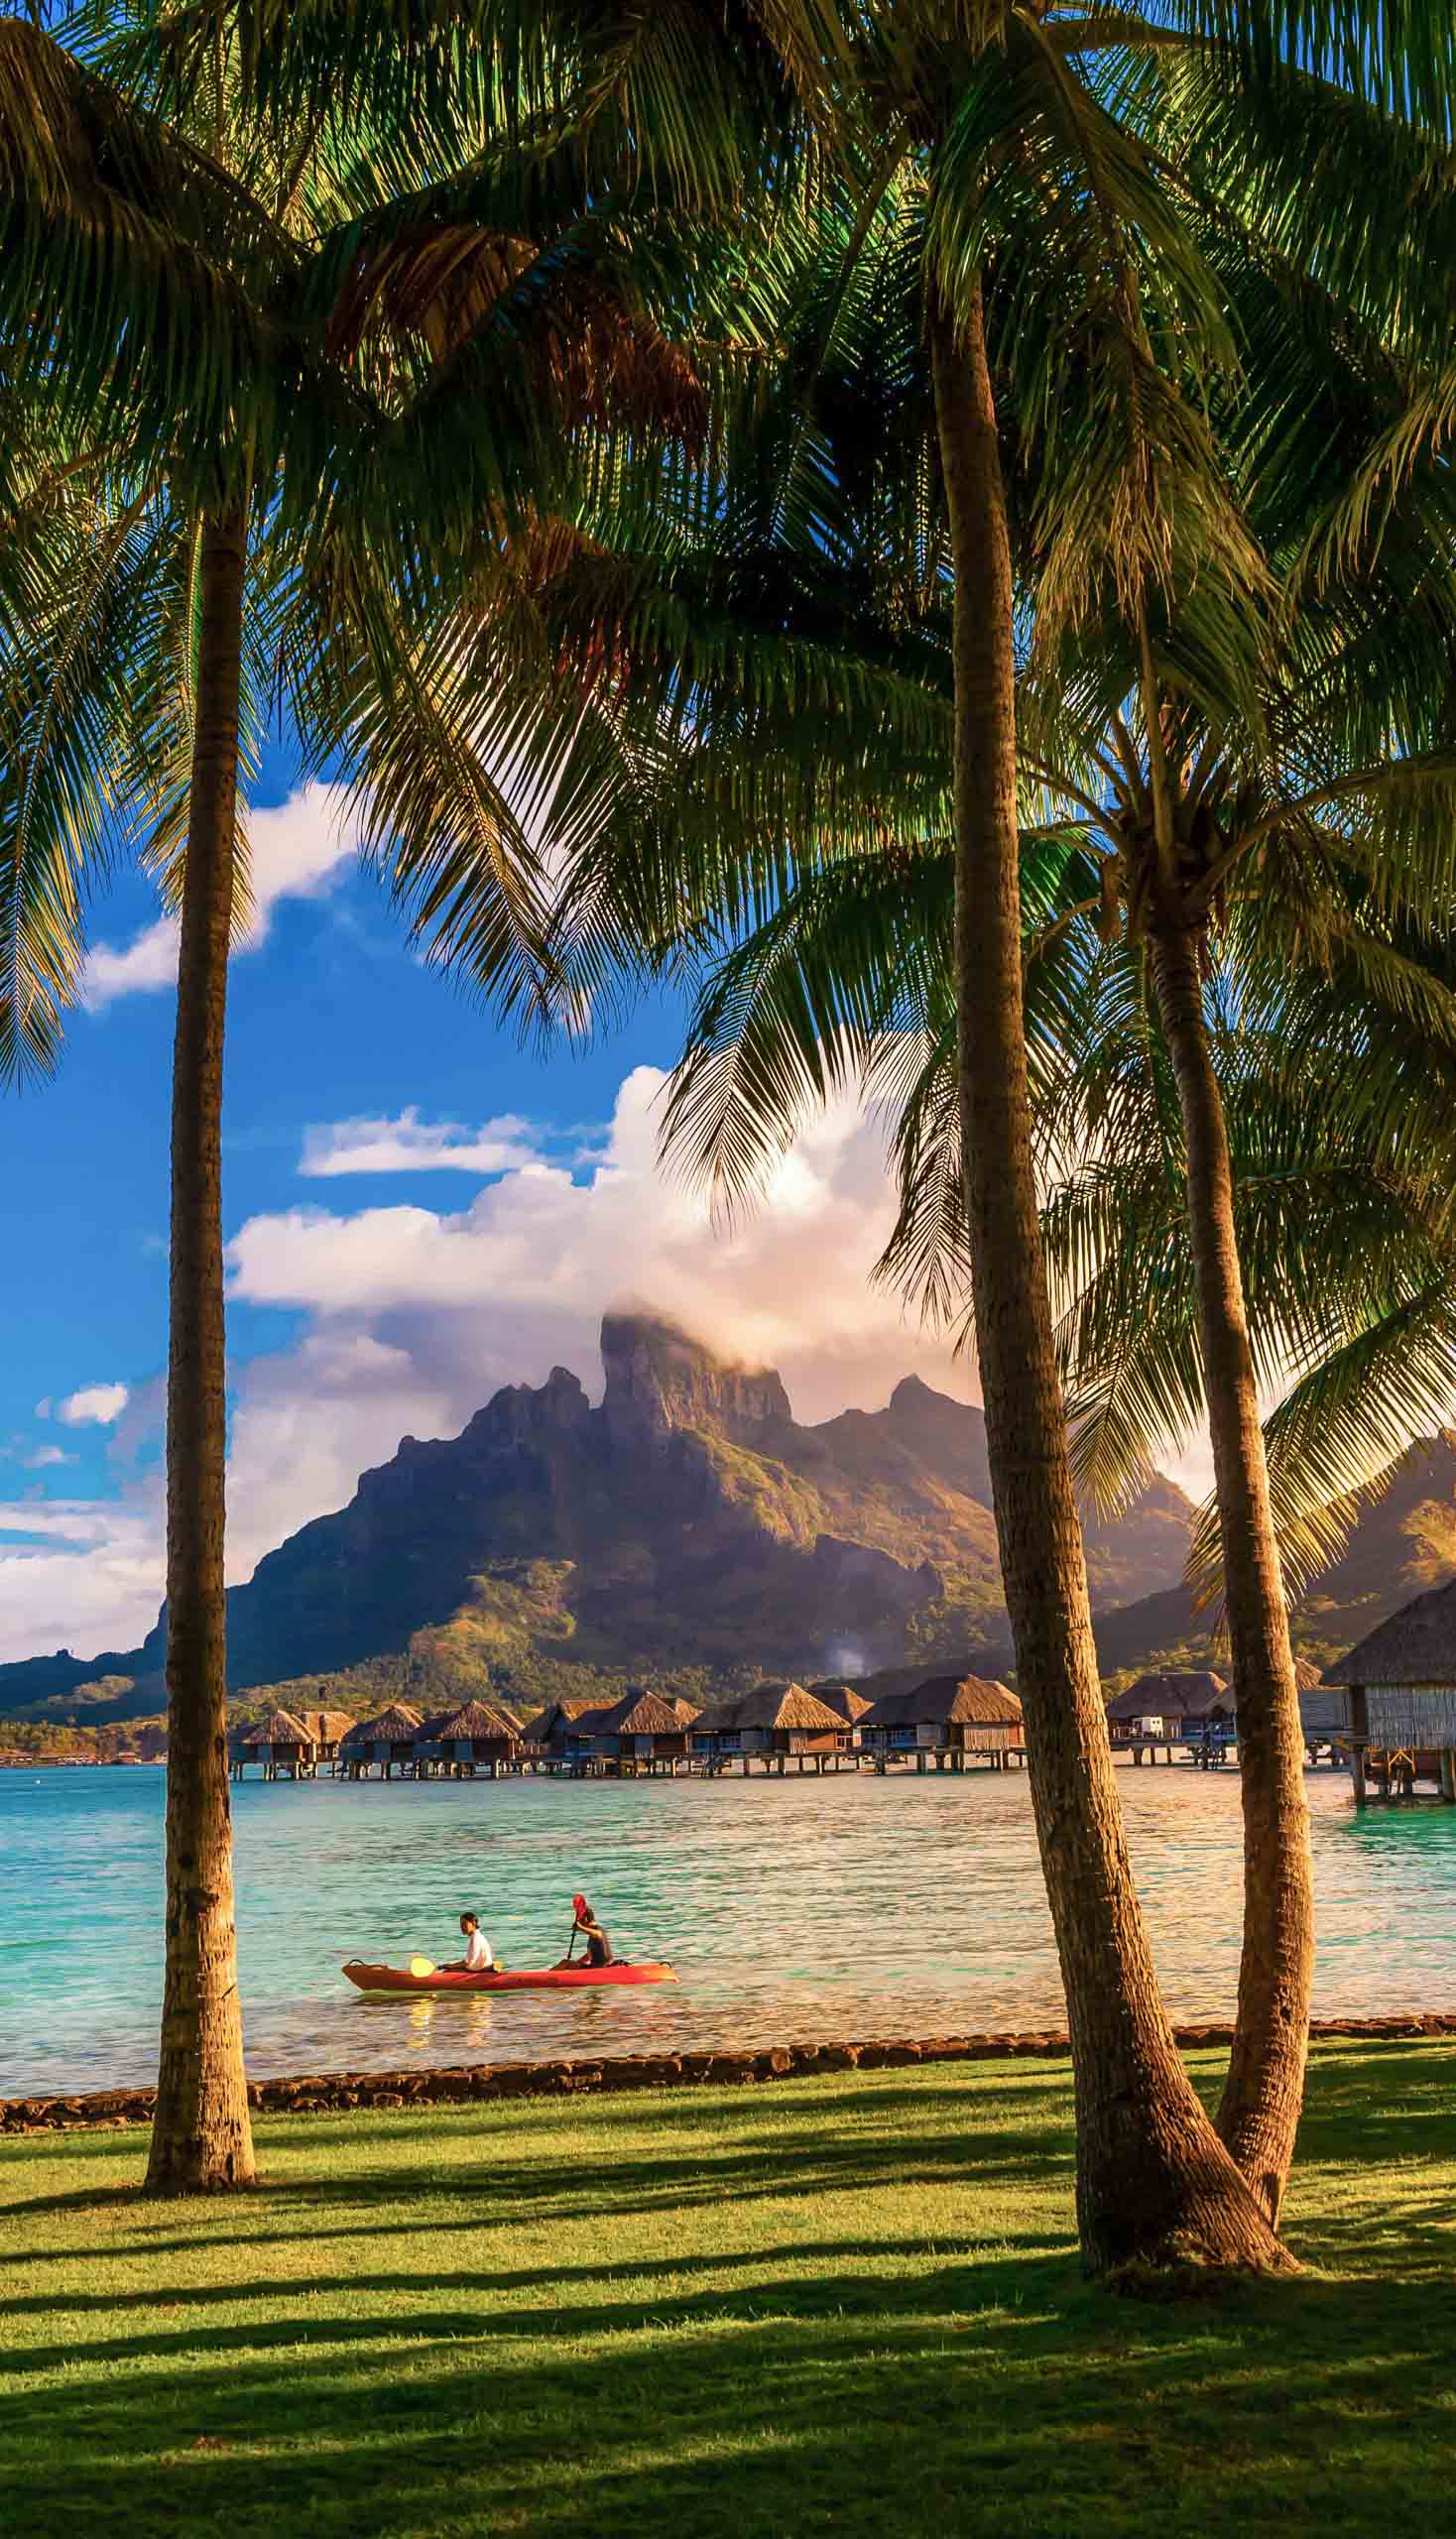 People kayaking in a resort in the French Polynesia.